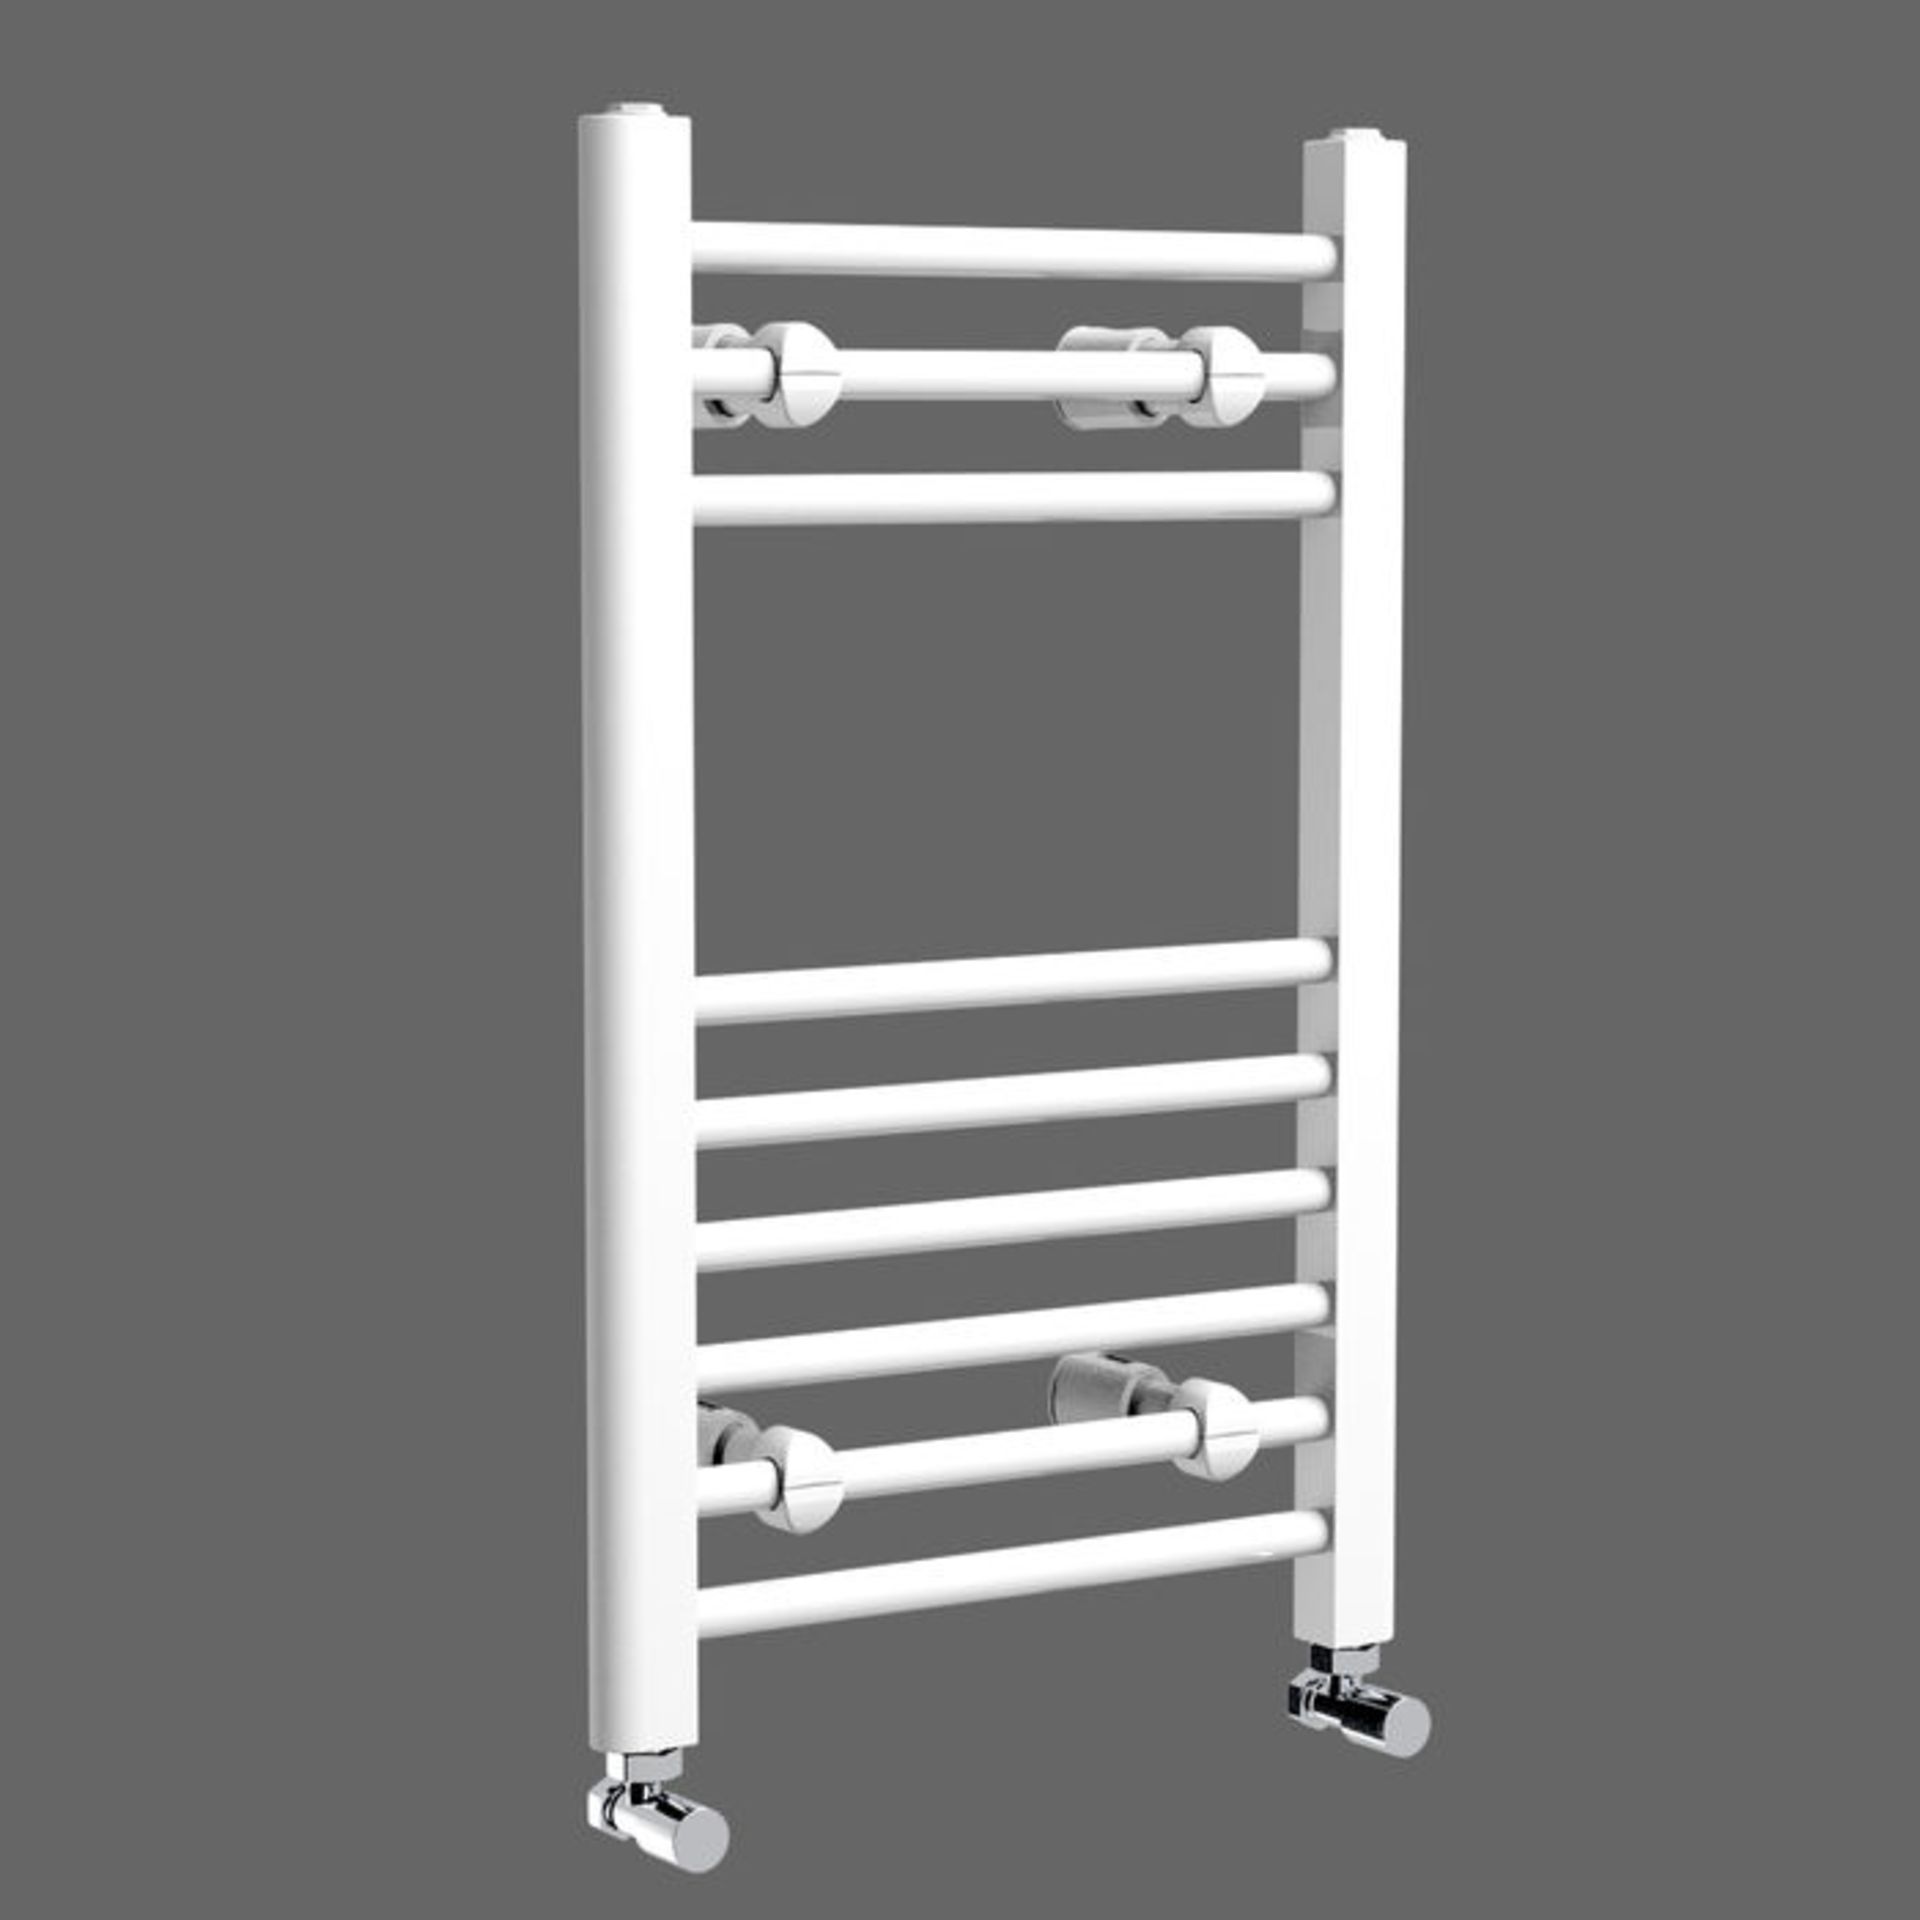 (P182) 650x400mm White Straight Rail Ladder Towel Radiator. Made from low carbon steel Finished - Image 3 of 3